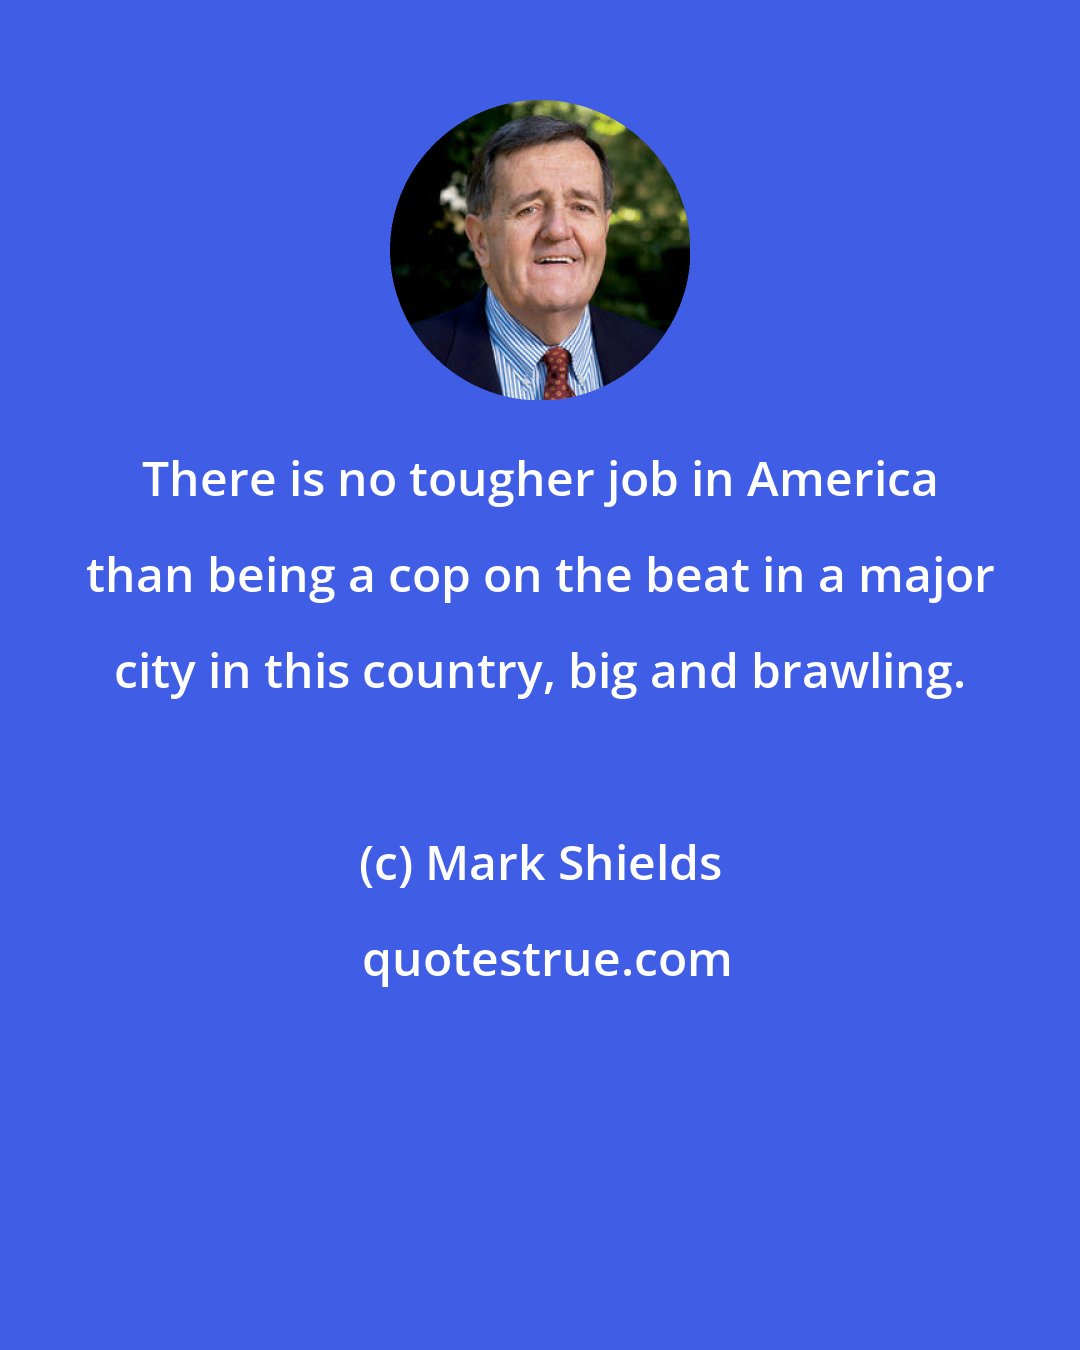 Mark Shields: There is no tougher job in America than being a cop on the beat in a major city in this country, big and brawling.